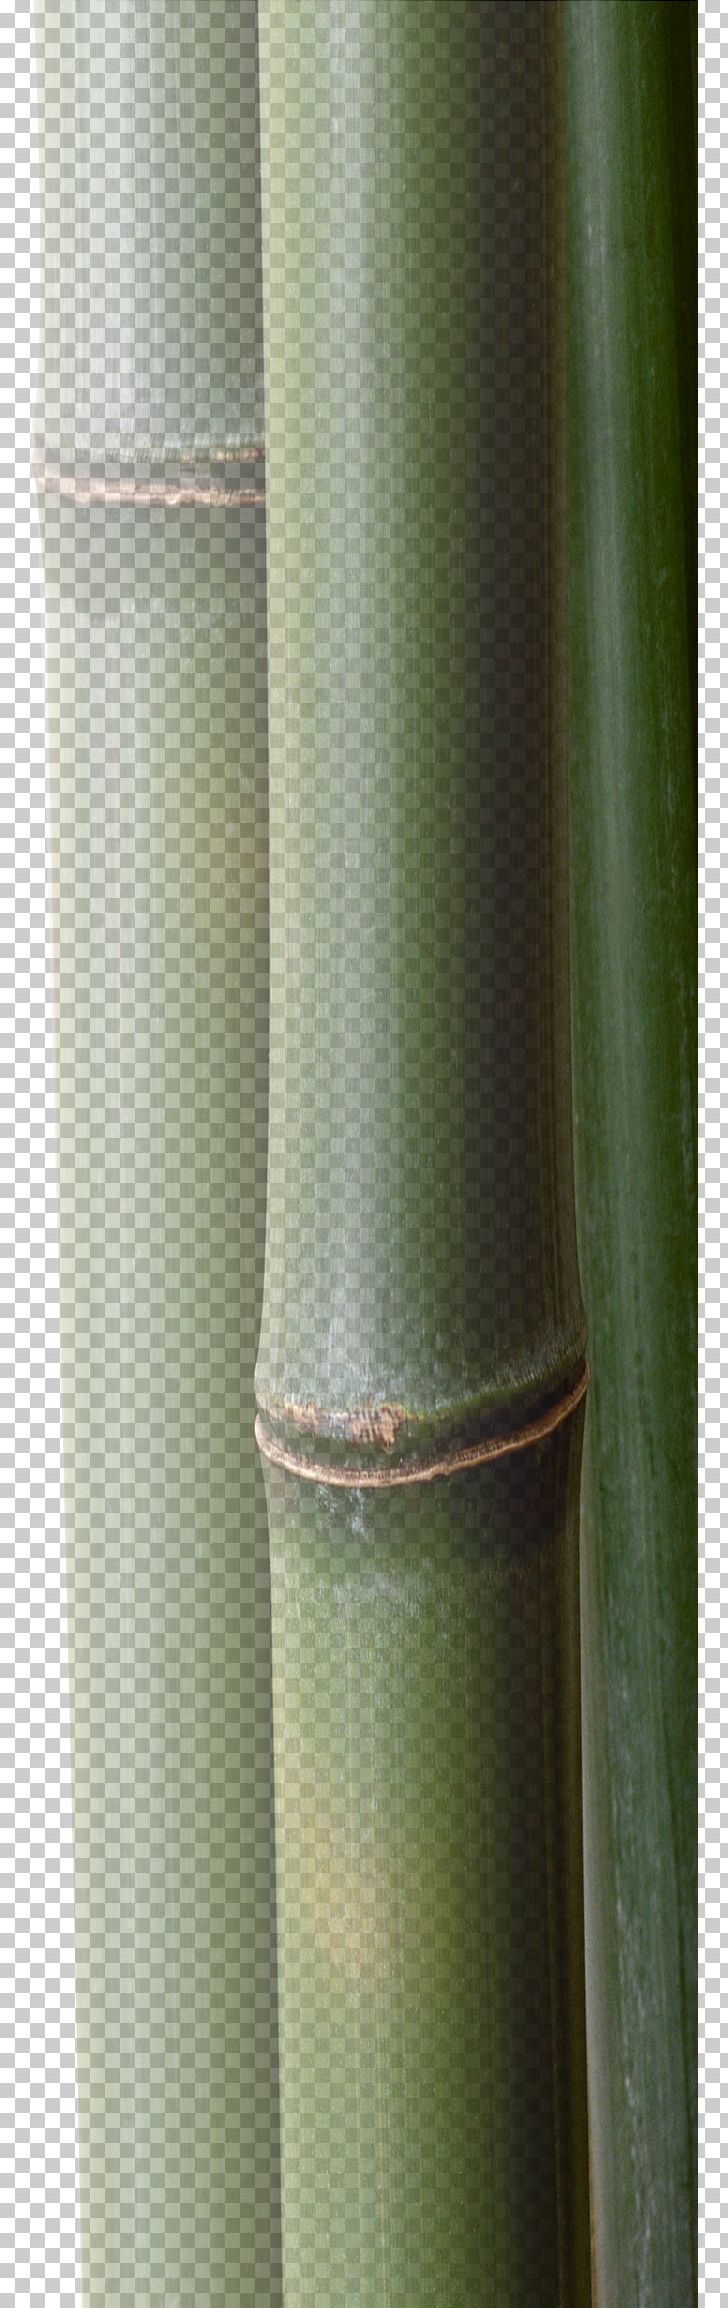 Plant Stem Cylinder PNG, Clipart, Bamboo, Bamboo Border, Bamboo Frame, Bamboo Leaf, Bamboo Leaves Free PNG Download